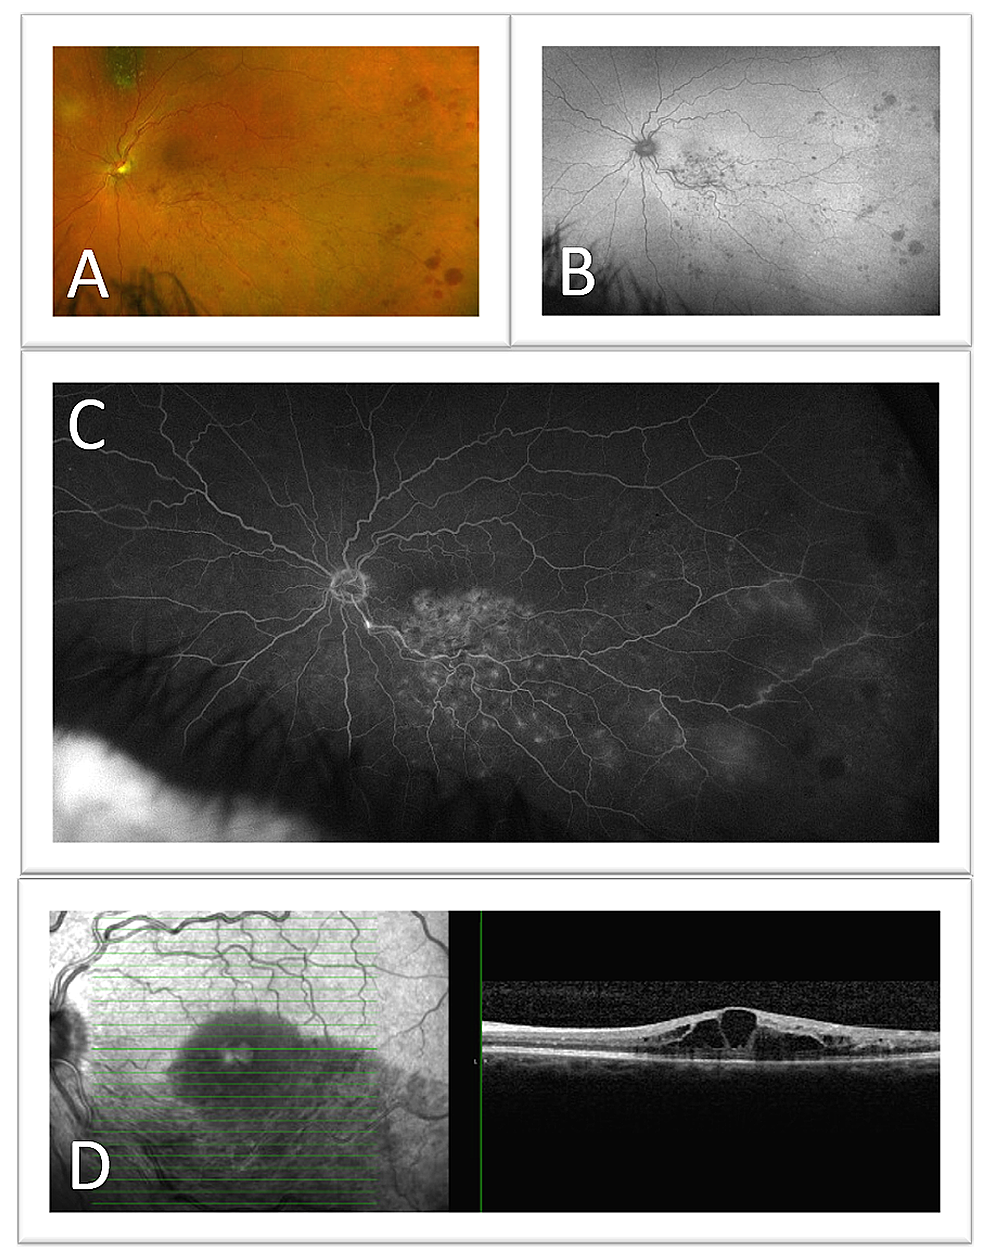 Cystoid-macular-edema-(CME)-in-the-setting-of-a-branch-retinal-vein-occlusion-(BRVO)-of-the-left-eye